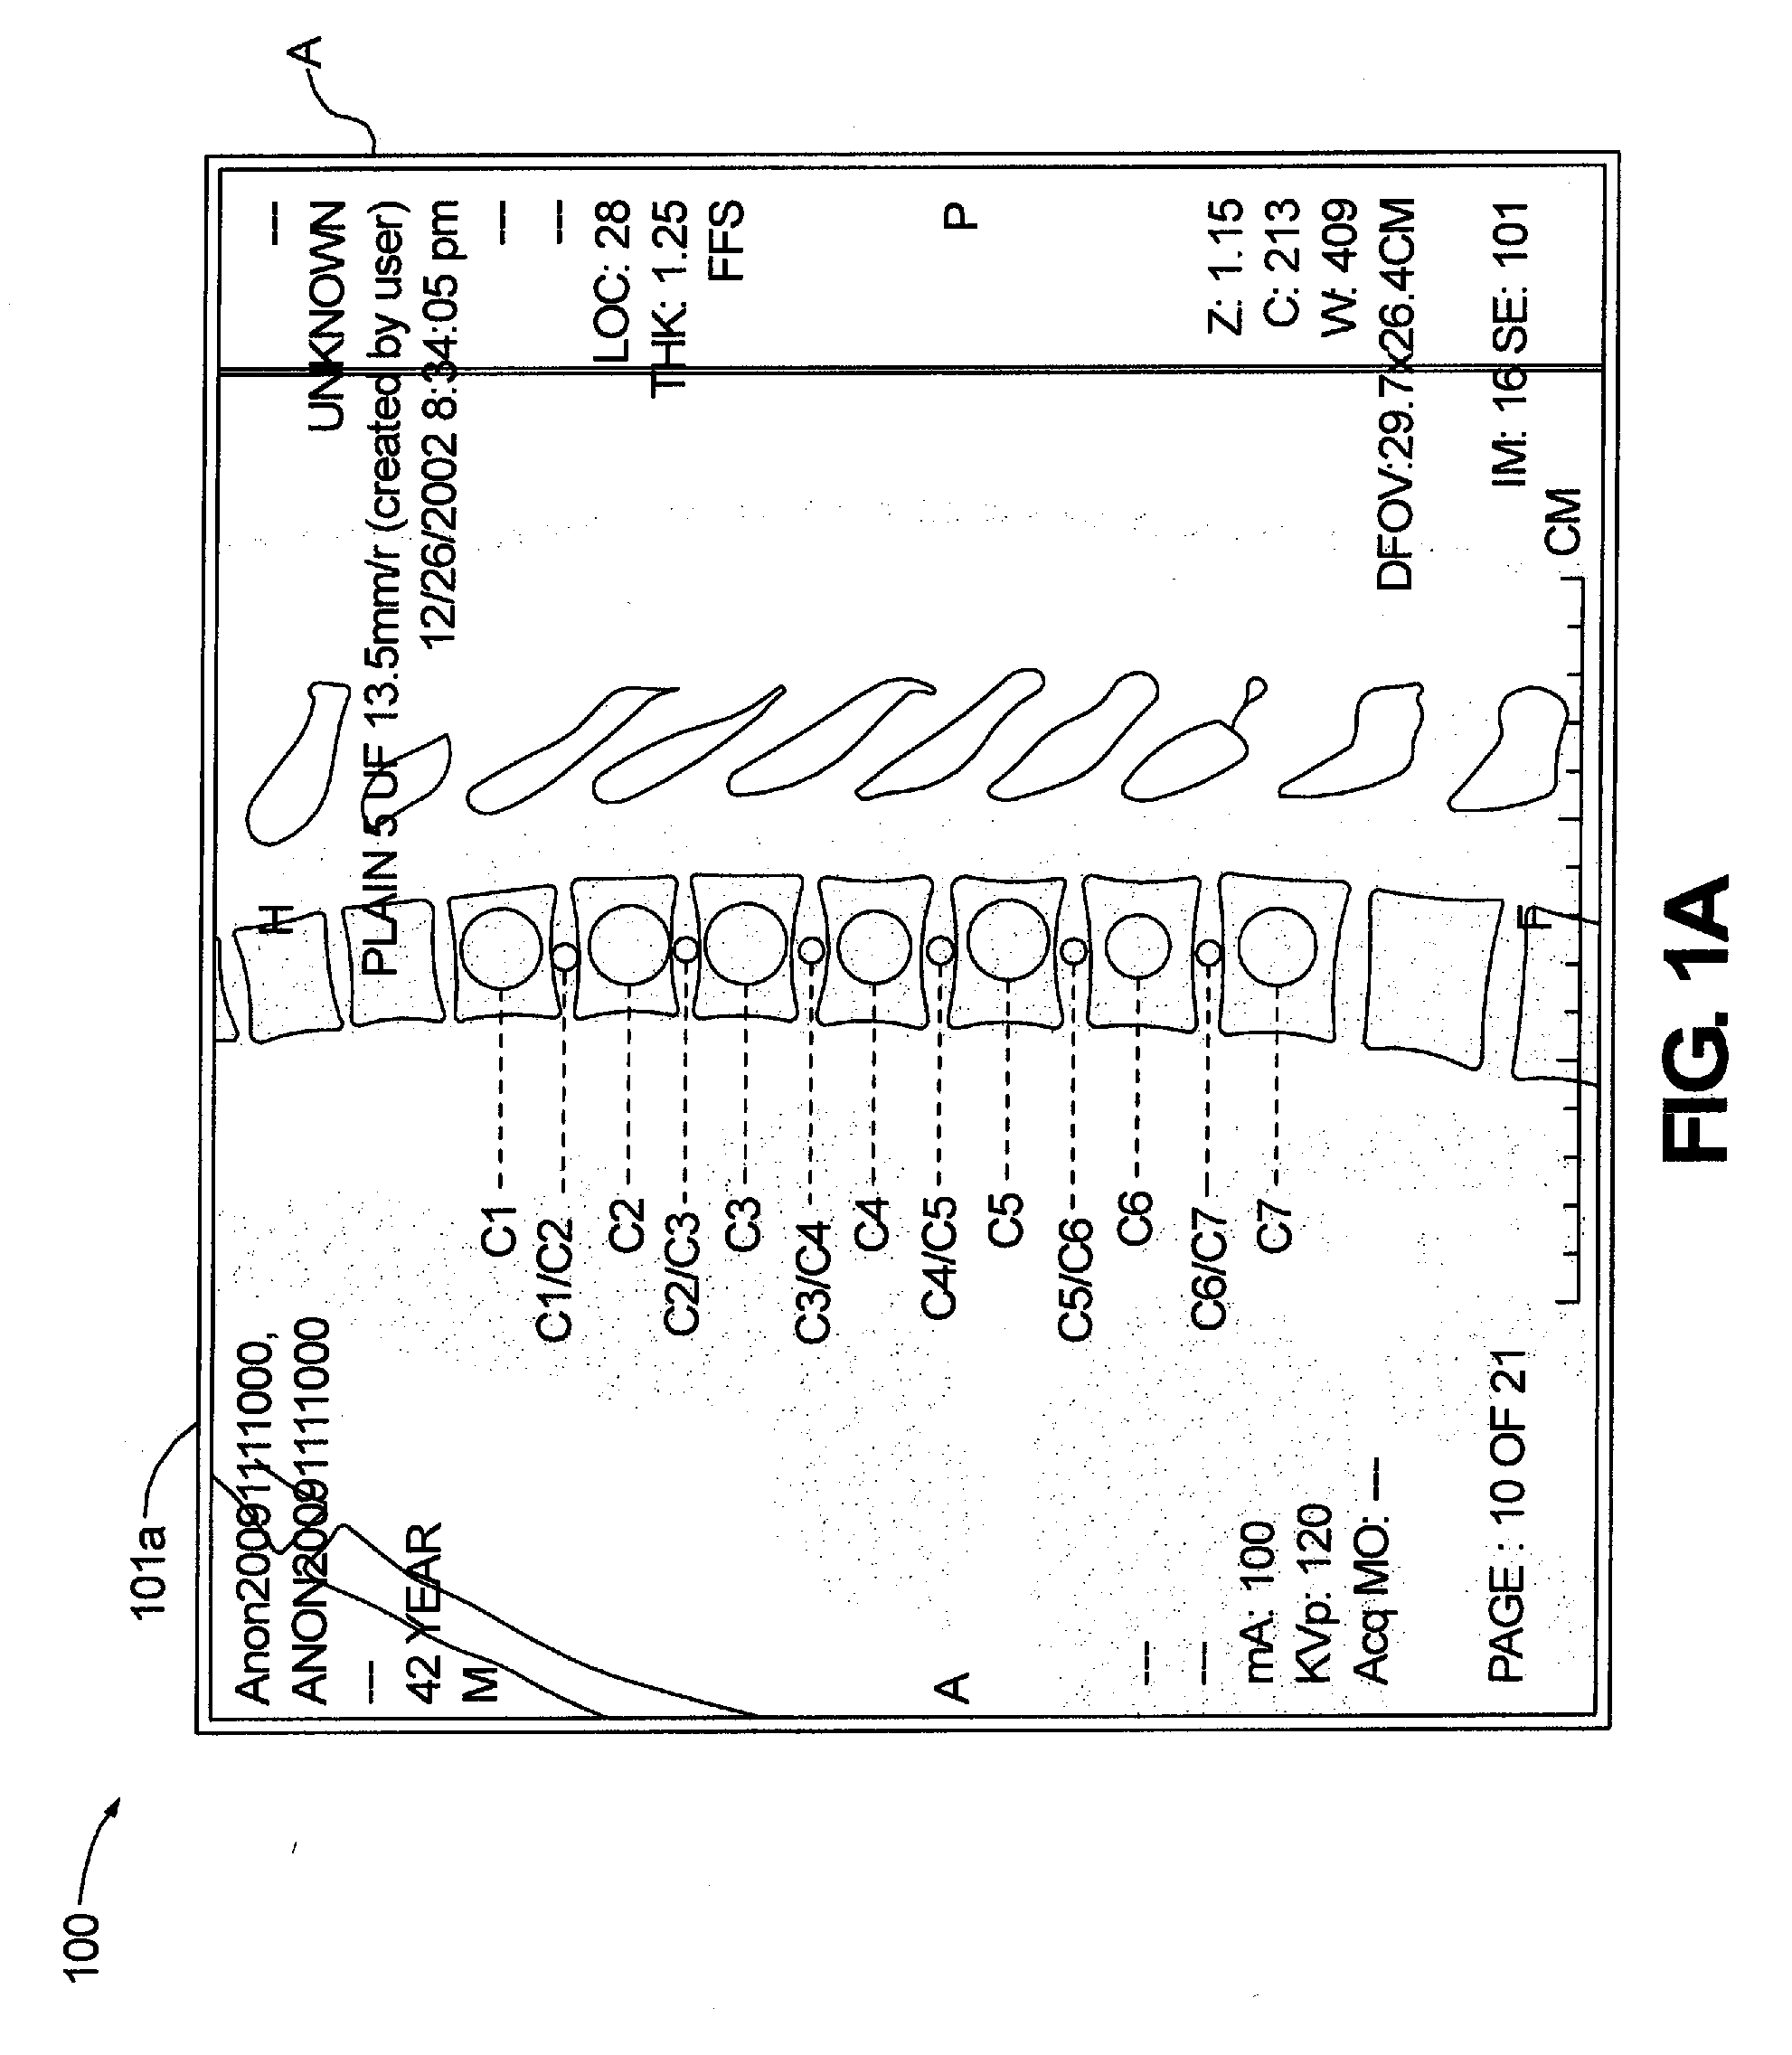 System and Method for Propagation of Spine Labeling